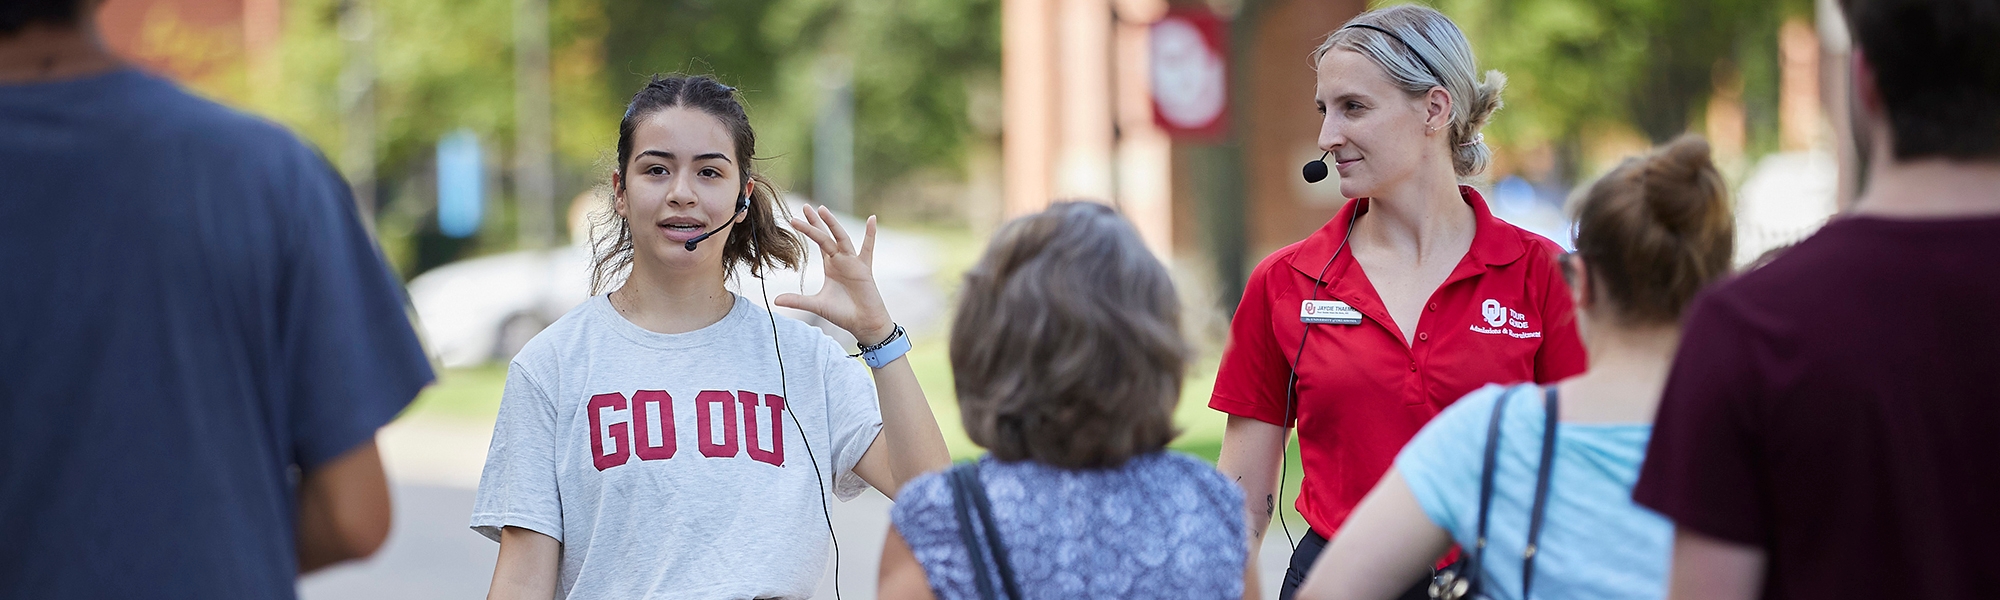 Two OU tour guides walk with a group of visitors on the University of Oklahoma campus.